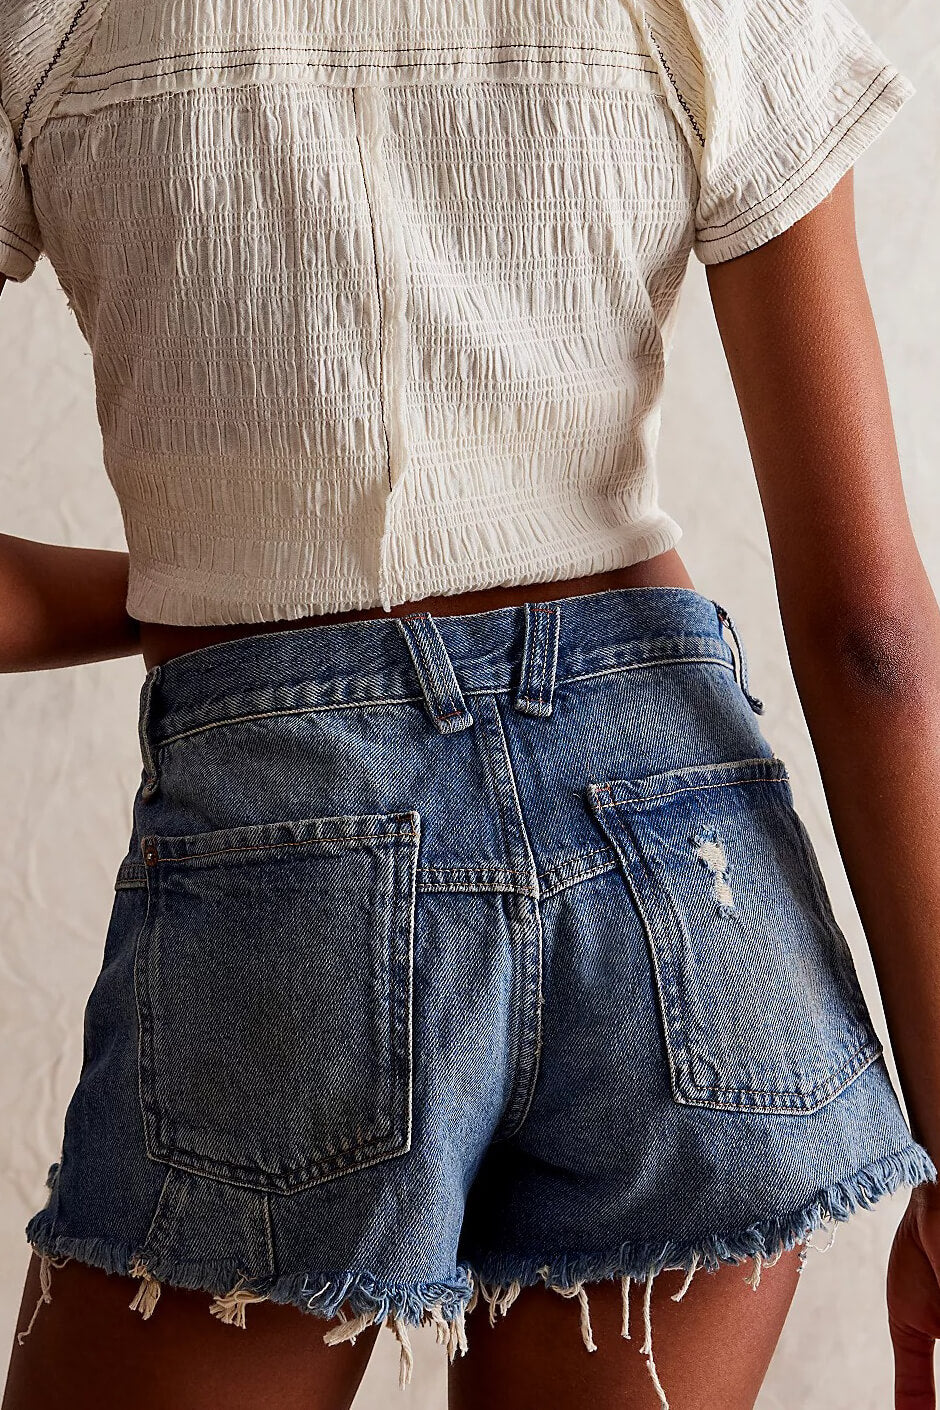 Free People now or never denim shorts in west end